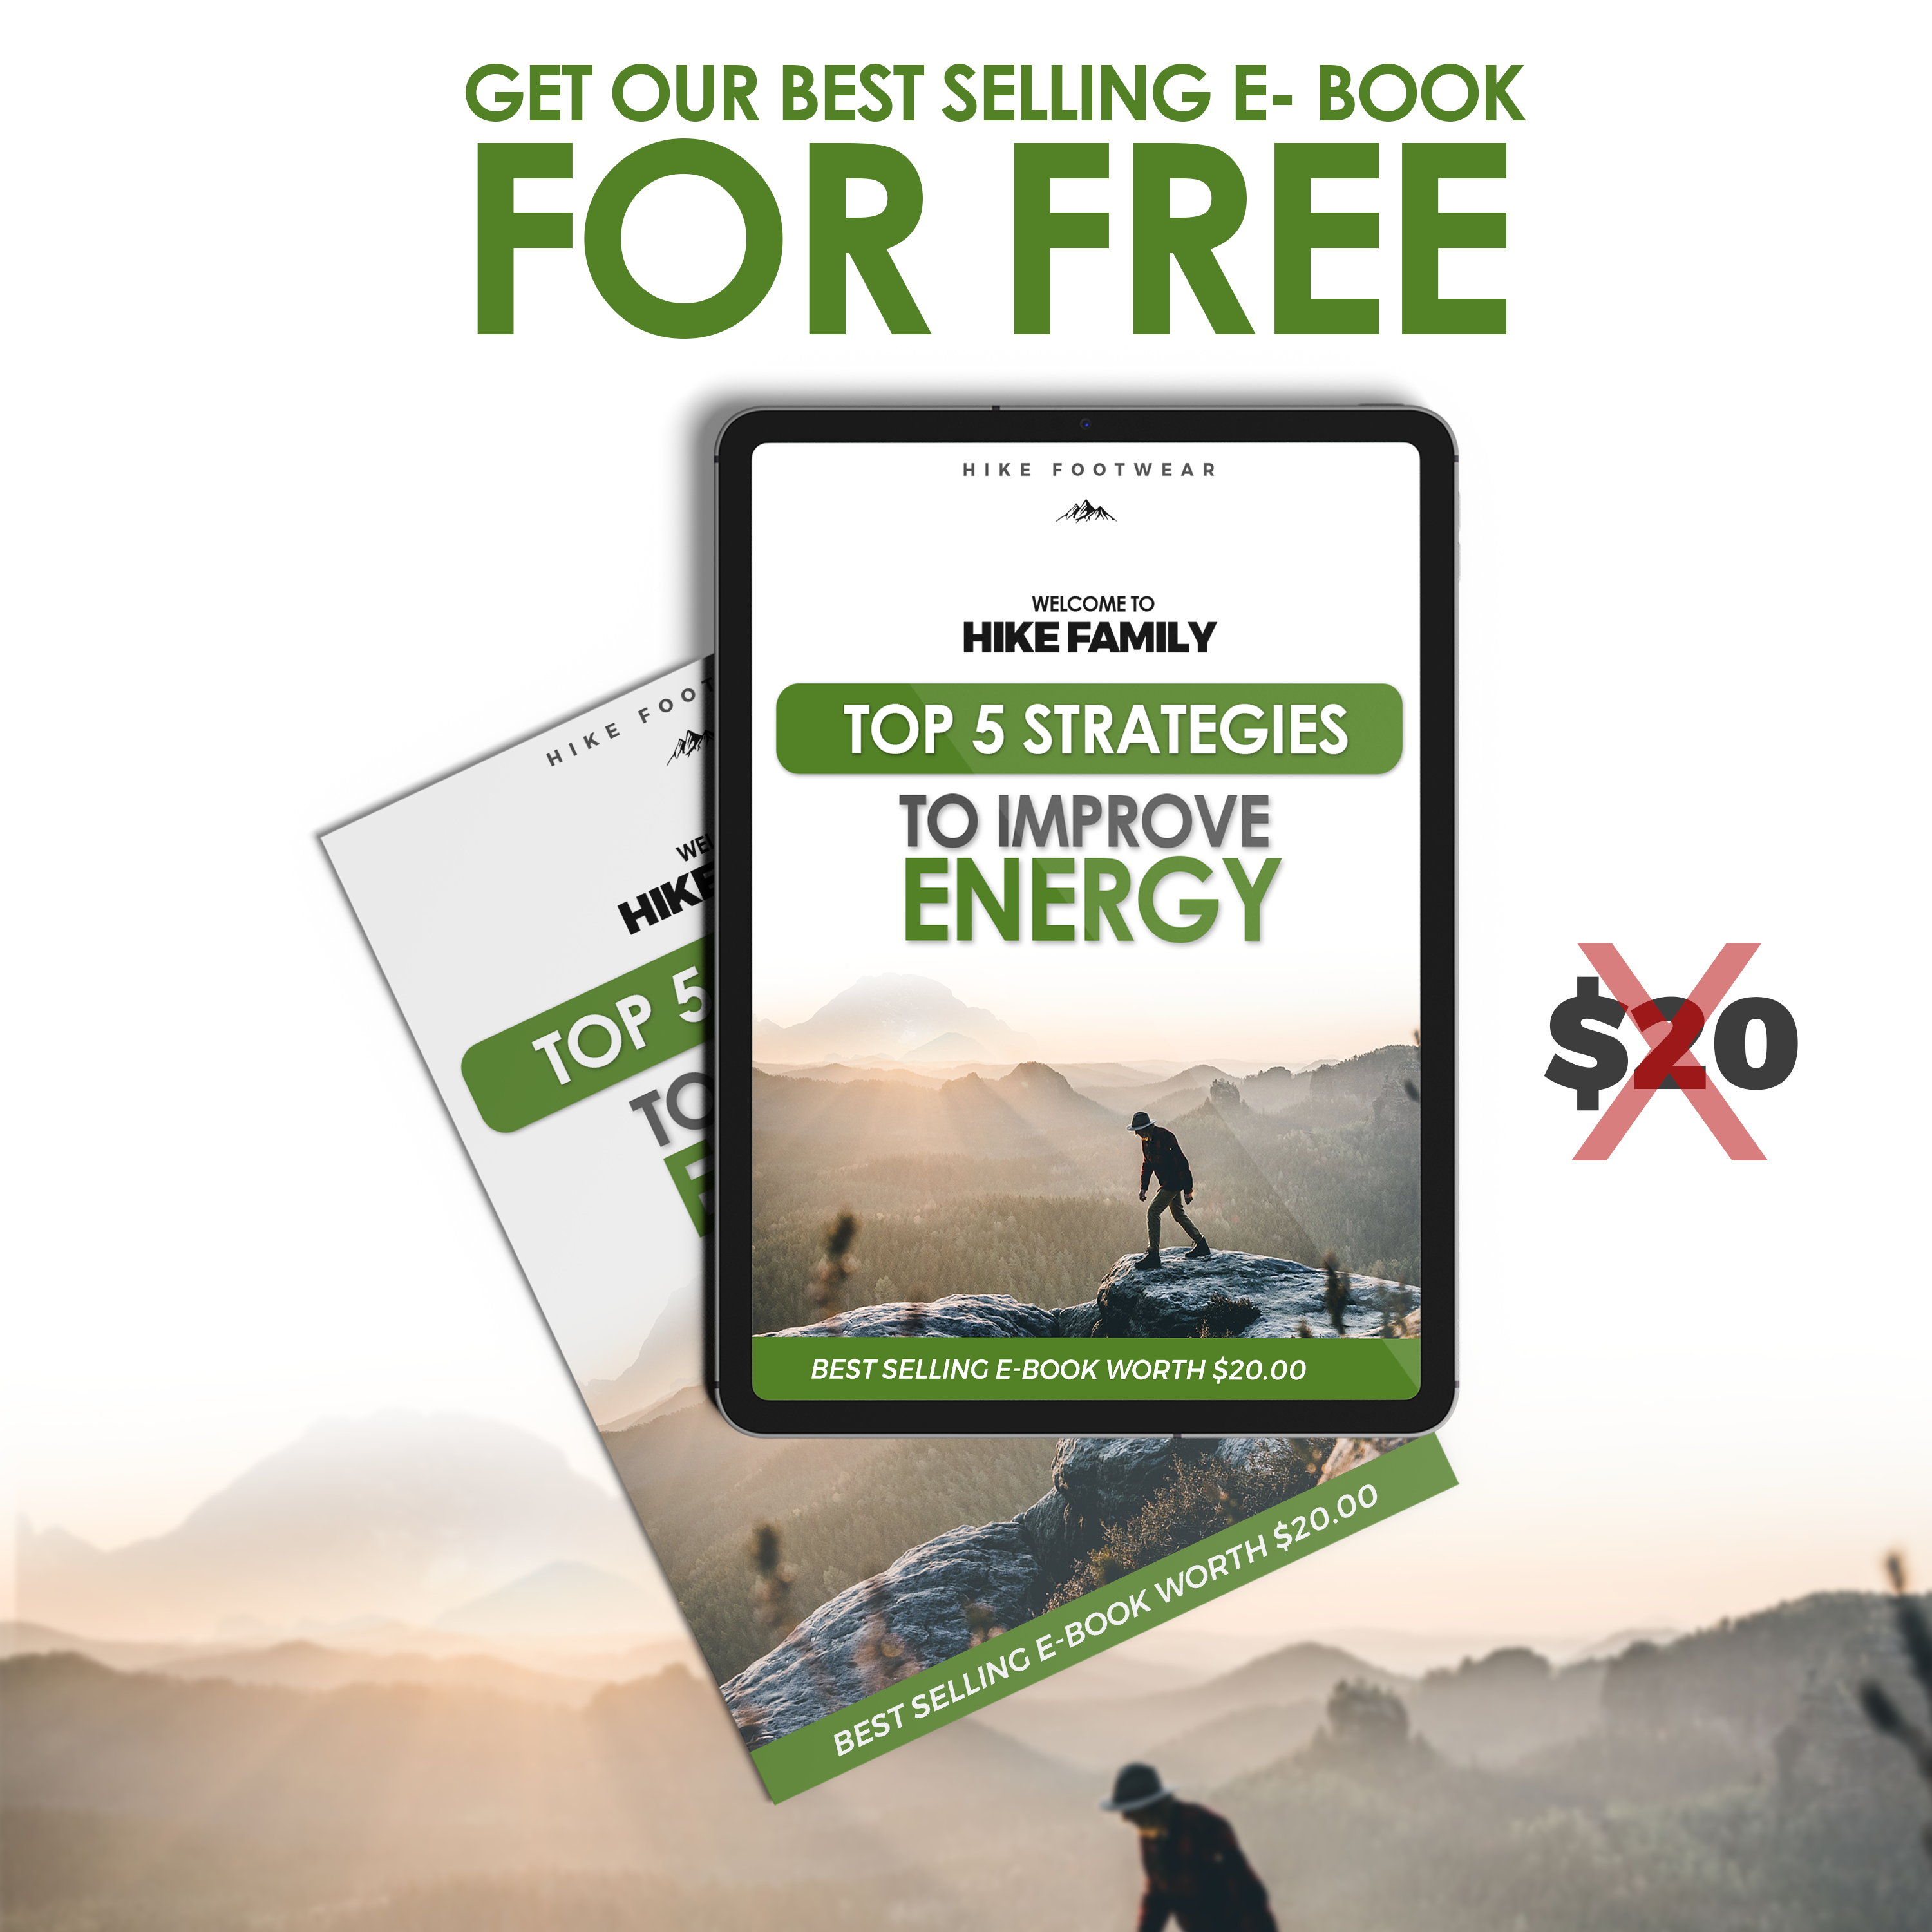 FREE E-BOOK - The 5 best strategies to improve energy for outdoor activities